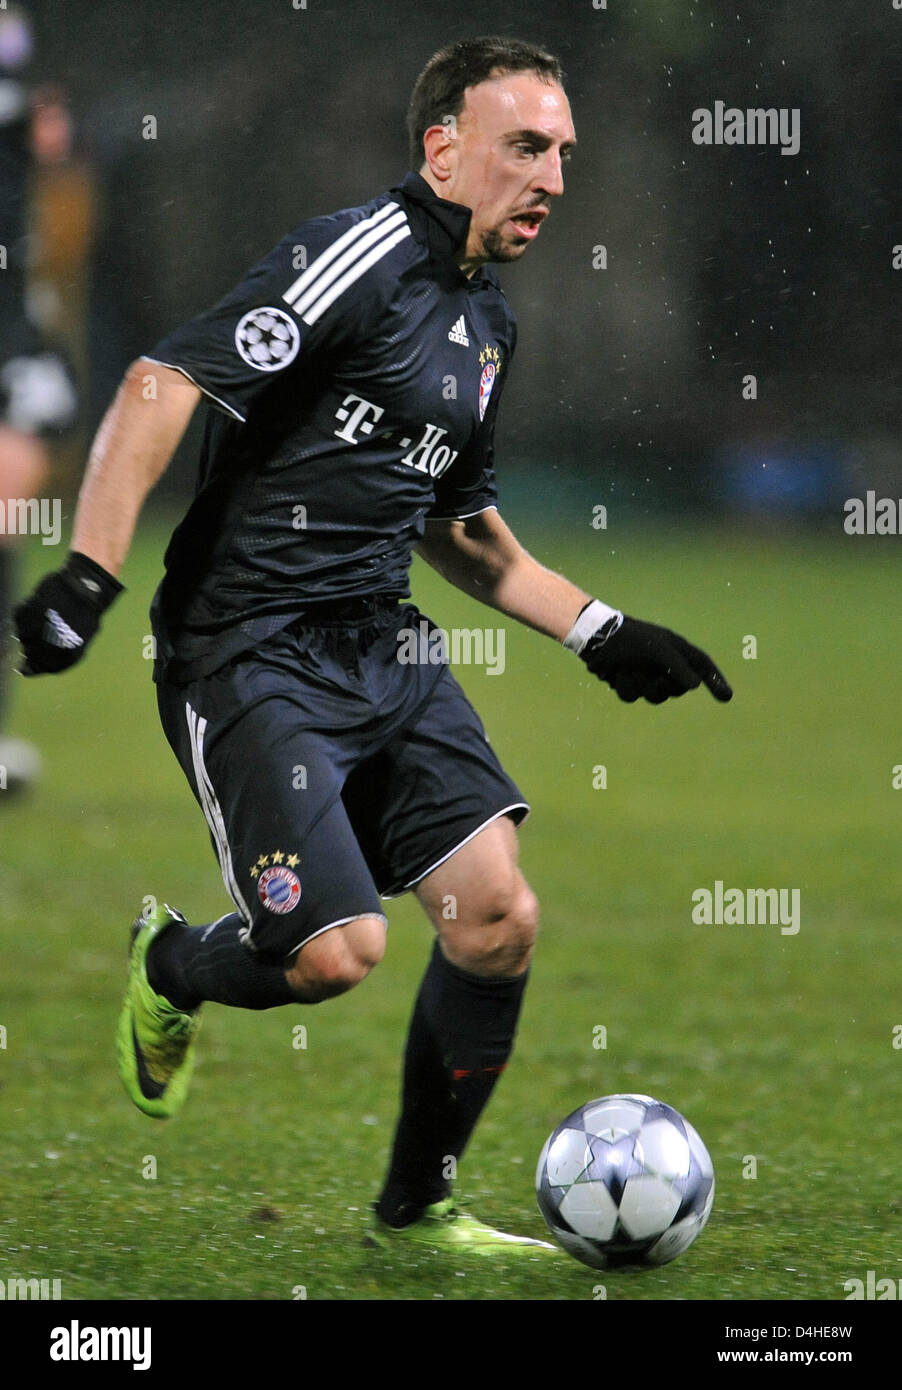 Franck Ribery of FC Bayern Munich is shown in action during the Champions League Group F match against Olympique Lyon at Stade de Gerland in Lyon, France, 10 December 2008. Bayern Munich defeated Lyon 3-2 securing the first place in UEFA Champions League Group F. Photo: Andreas Gebert Stock Photo